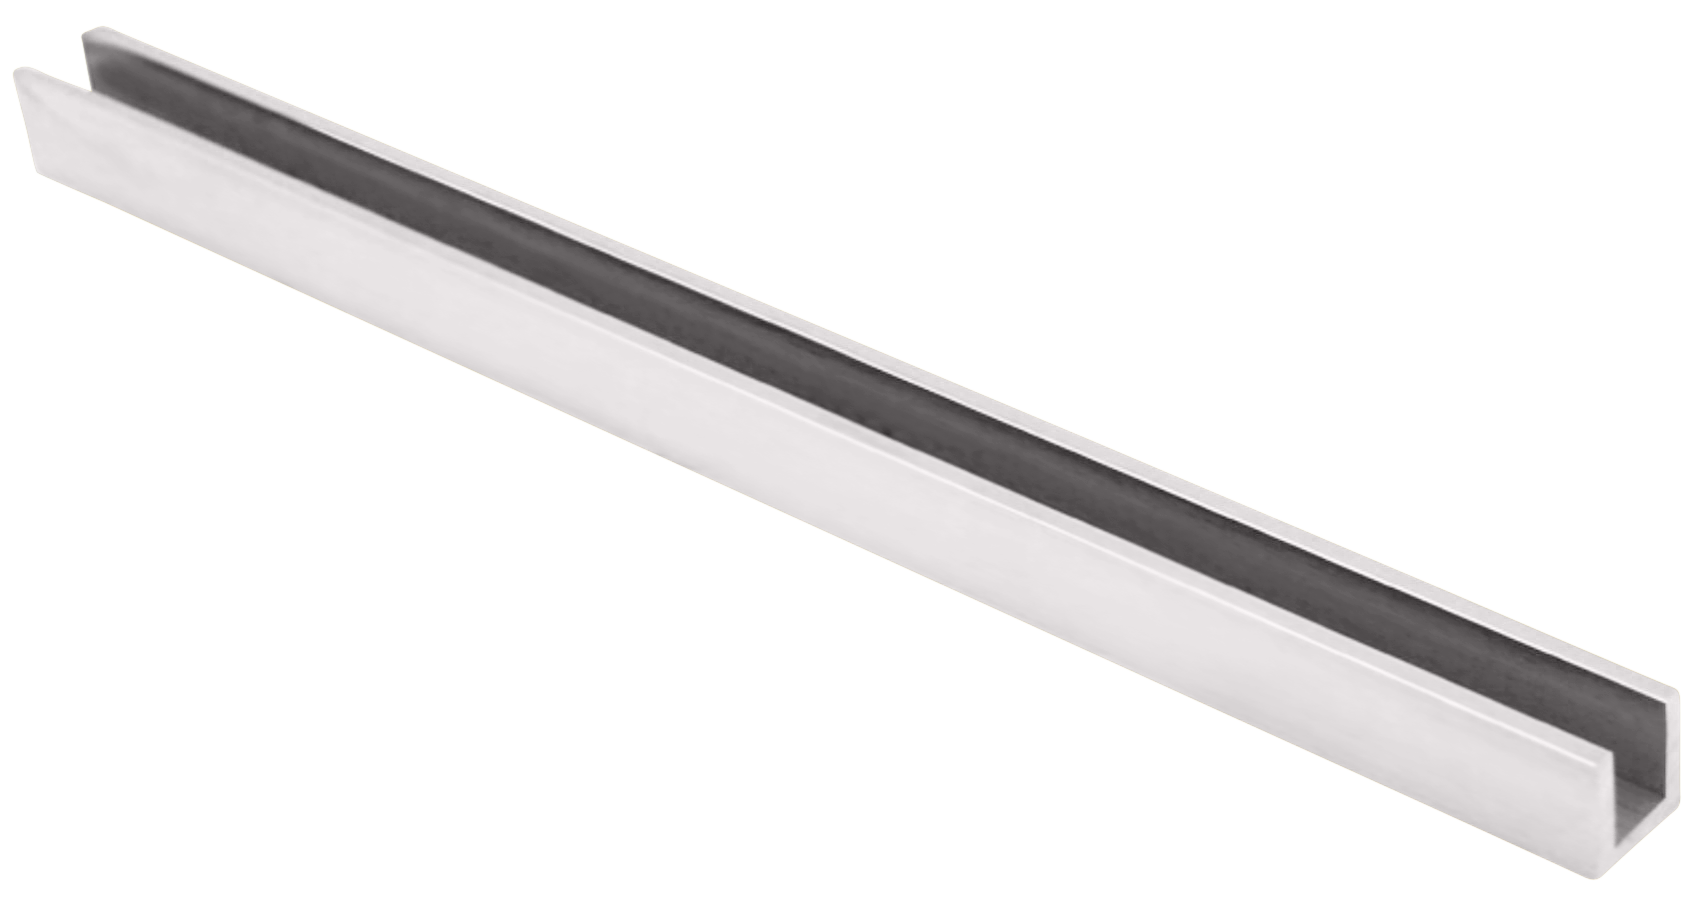 Flat back u-channel with 1/2" opening - 95" long - All finishes Satin Stainless Steel